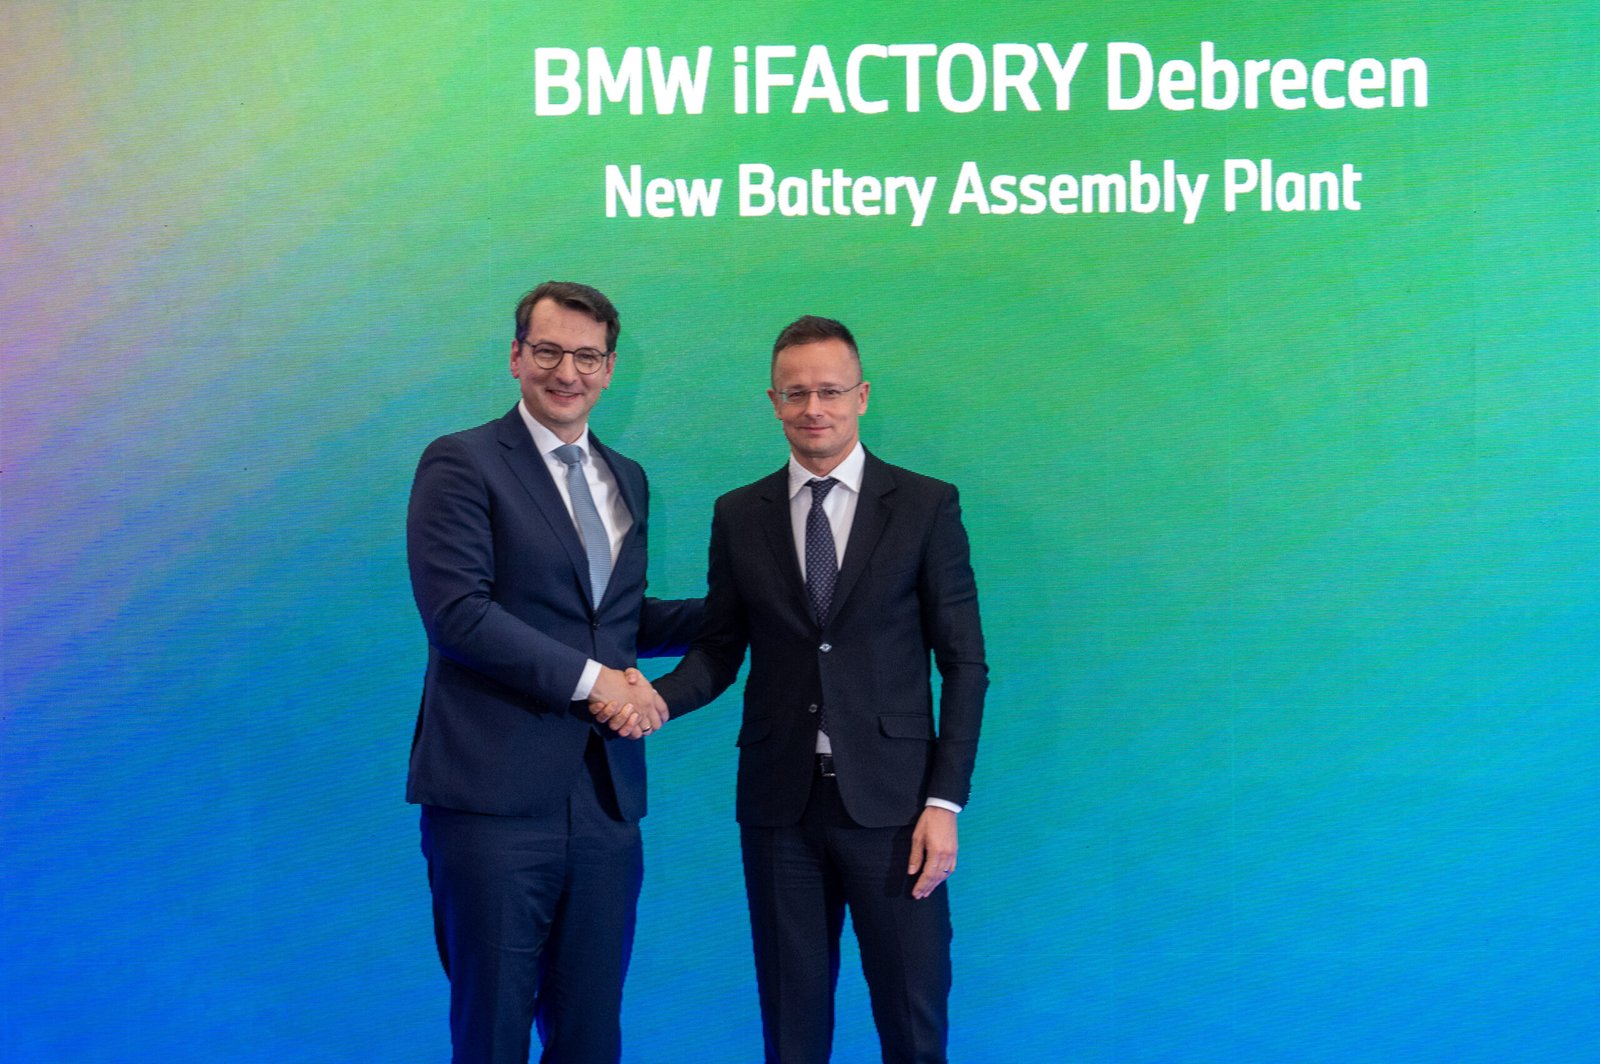 BMW Group will invest more than 2 billion euros in the Hungarian plant Debrecen by 2025